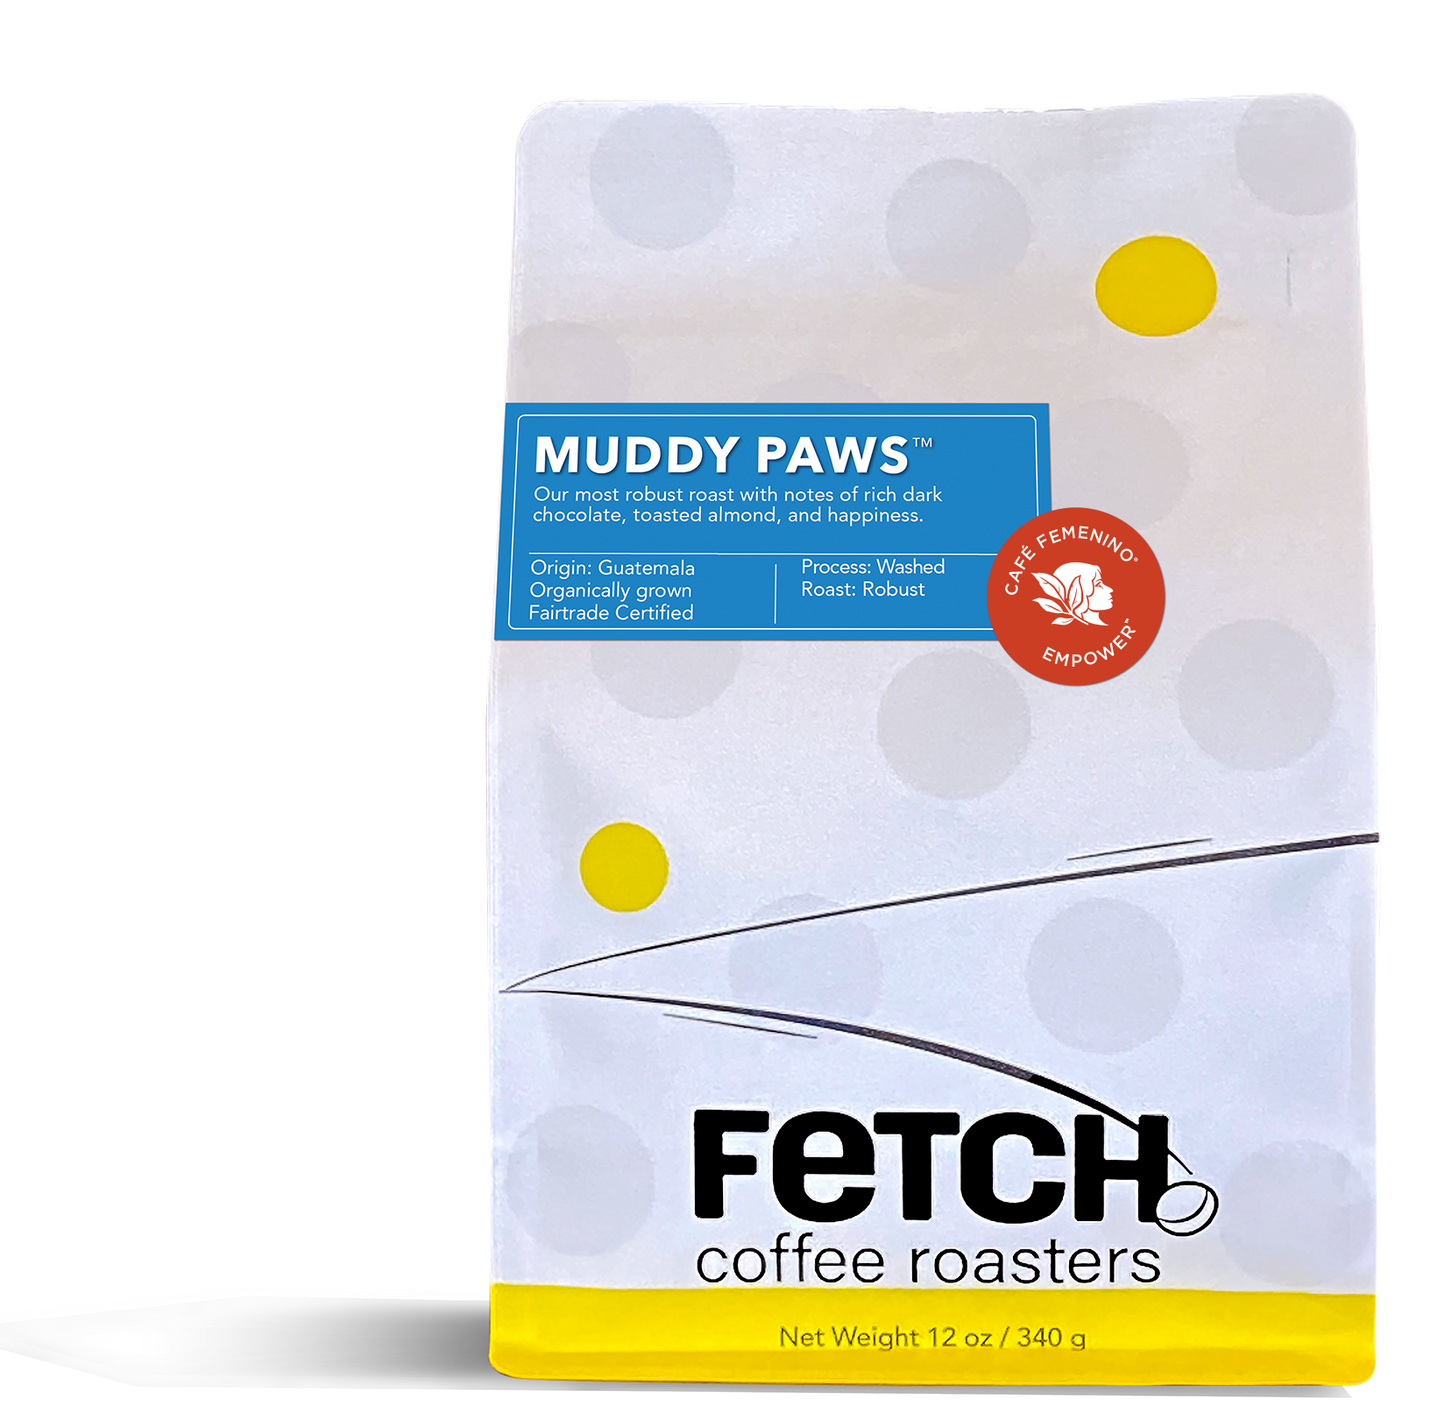 White Kraft paper coffee bag with a yellow band on the bottom and the Fetch logo with a bean next to the 'h'. The Muddy Paws label is a rich blue and there is a red Cafe Feminino sticker next to the Muddy Paws label.